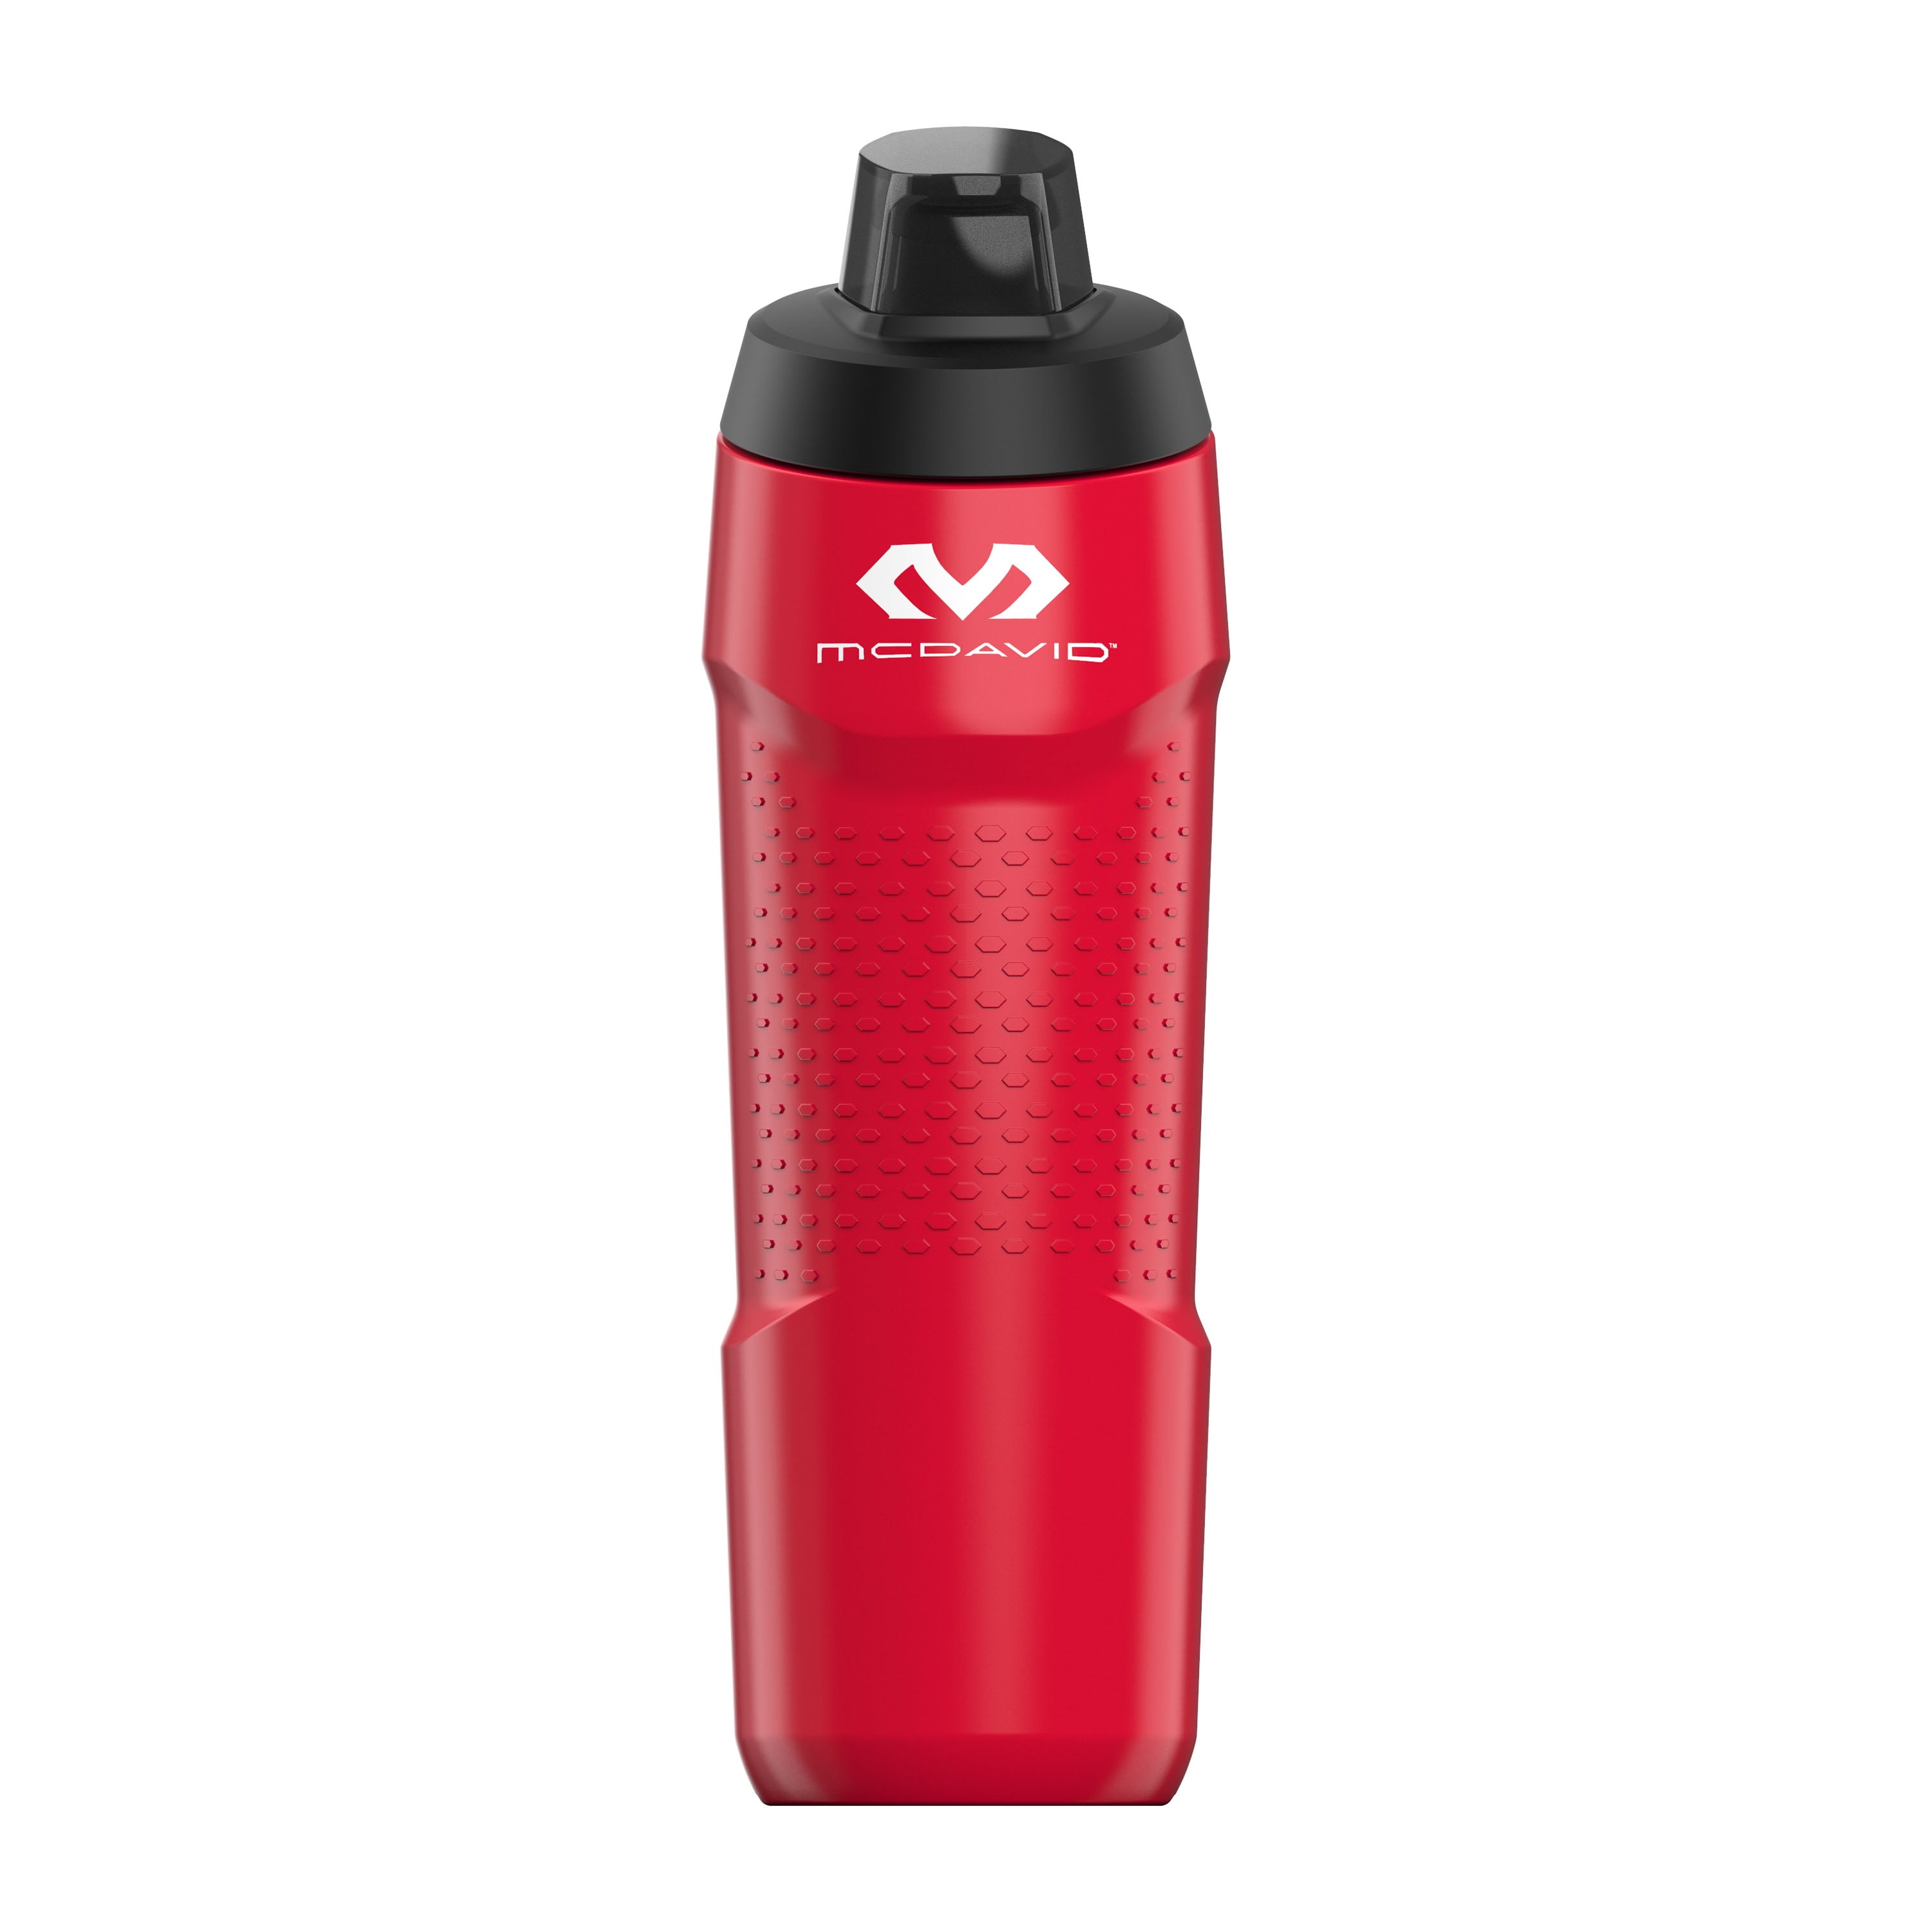 Under Armour Draft 24 Ounce Water Bottle, Charcoal